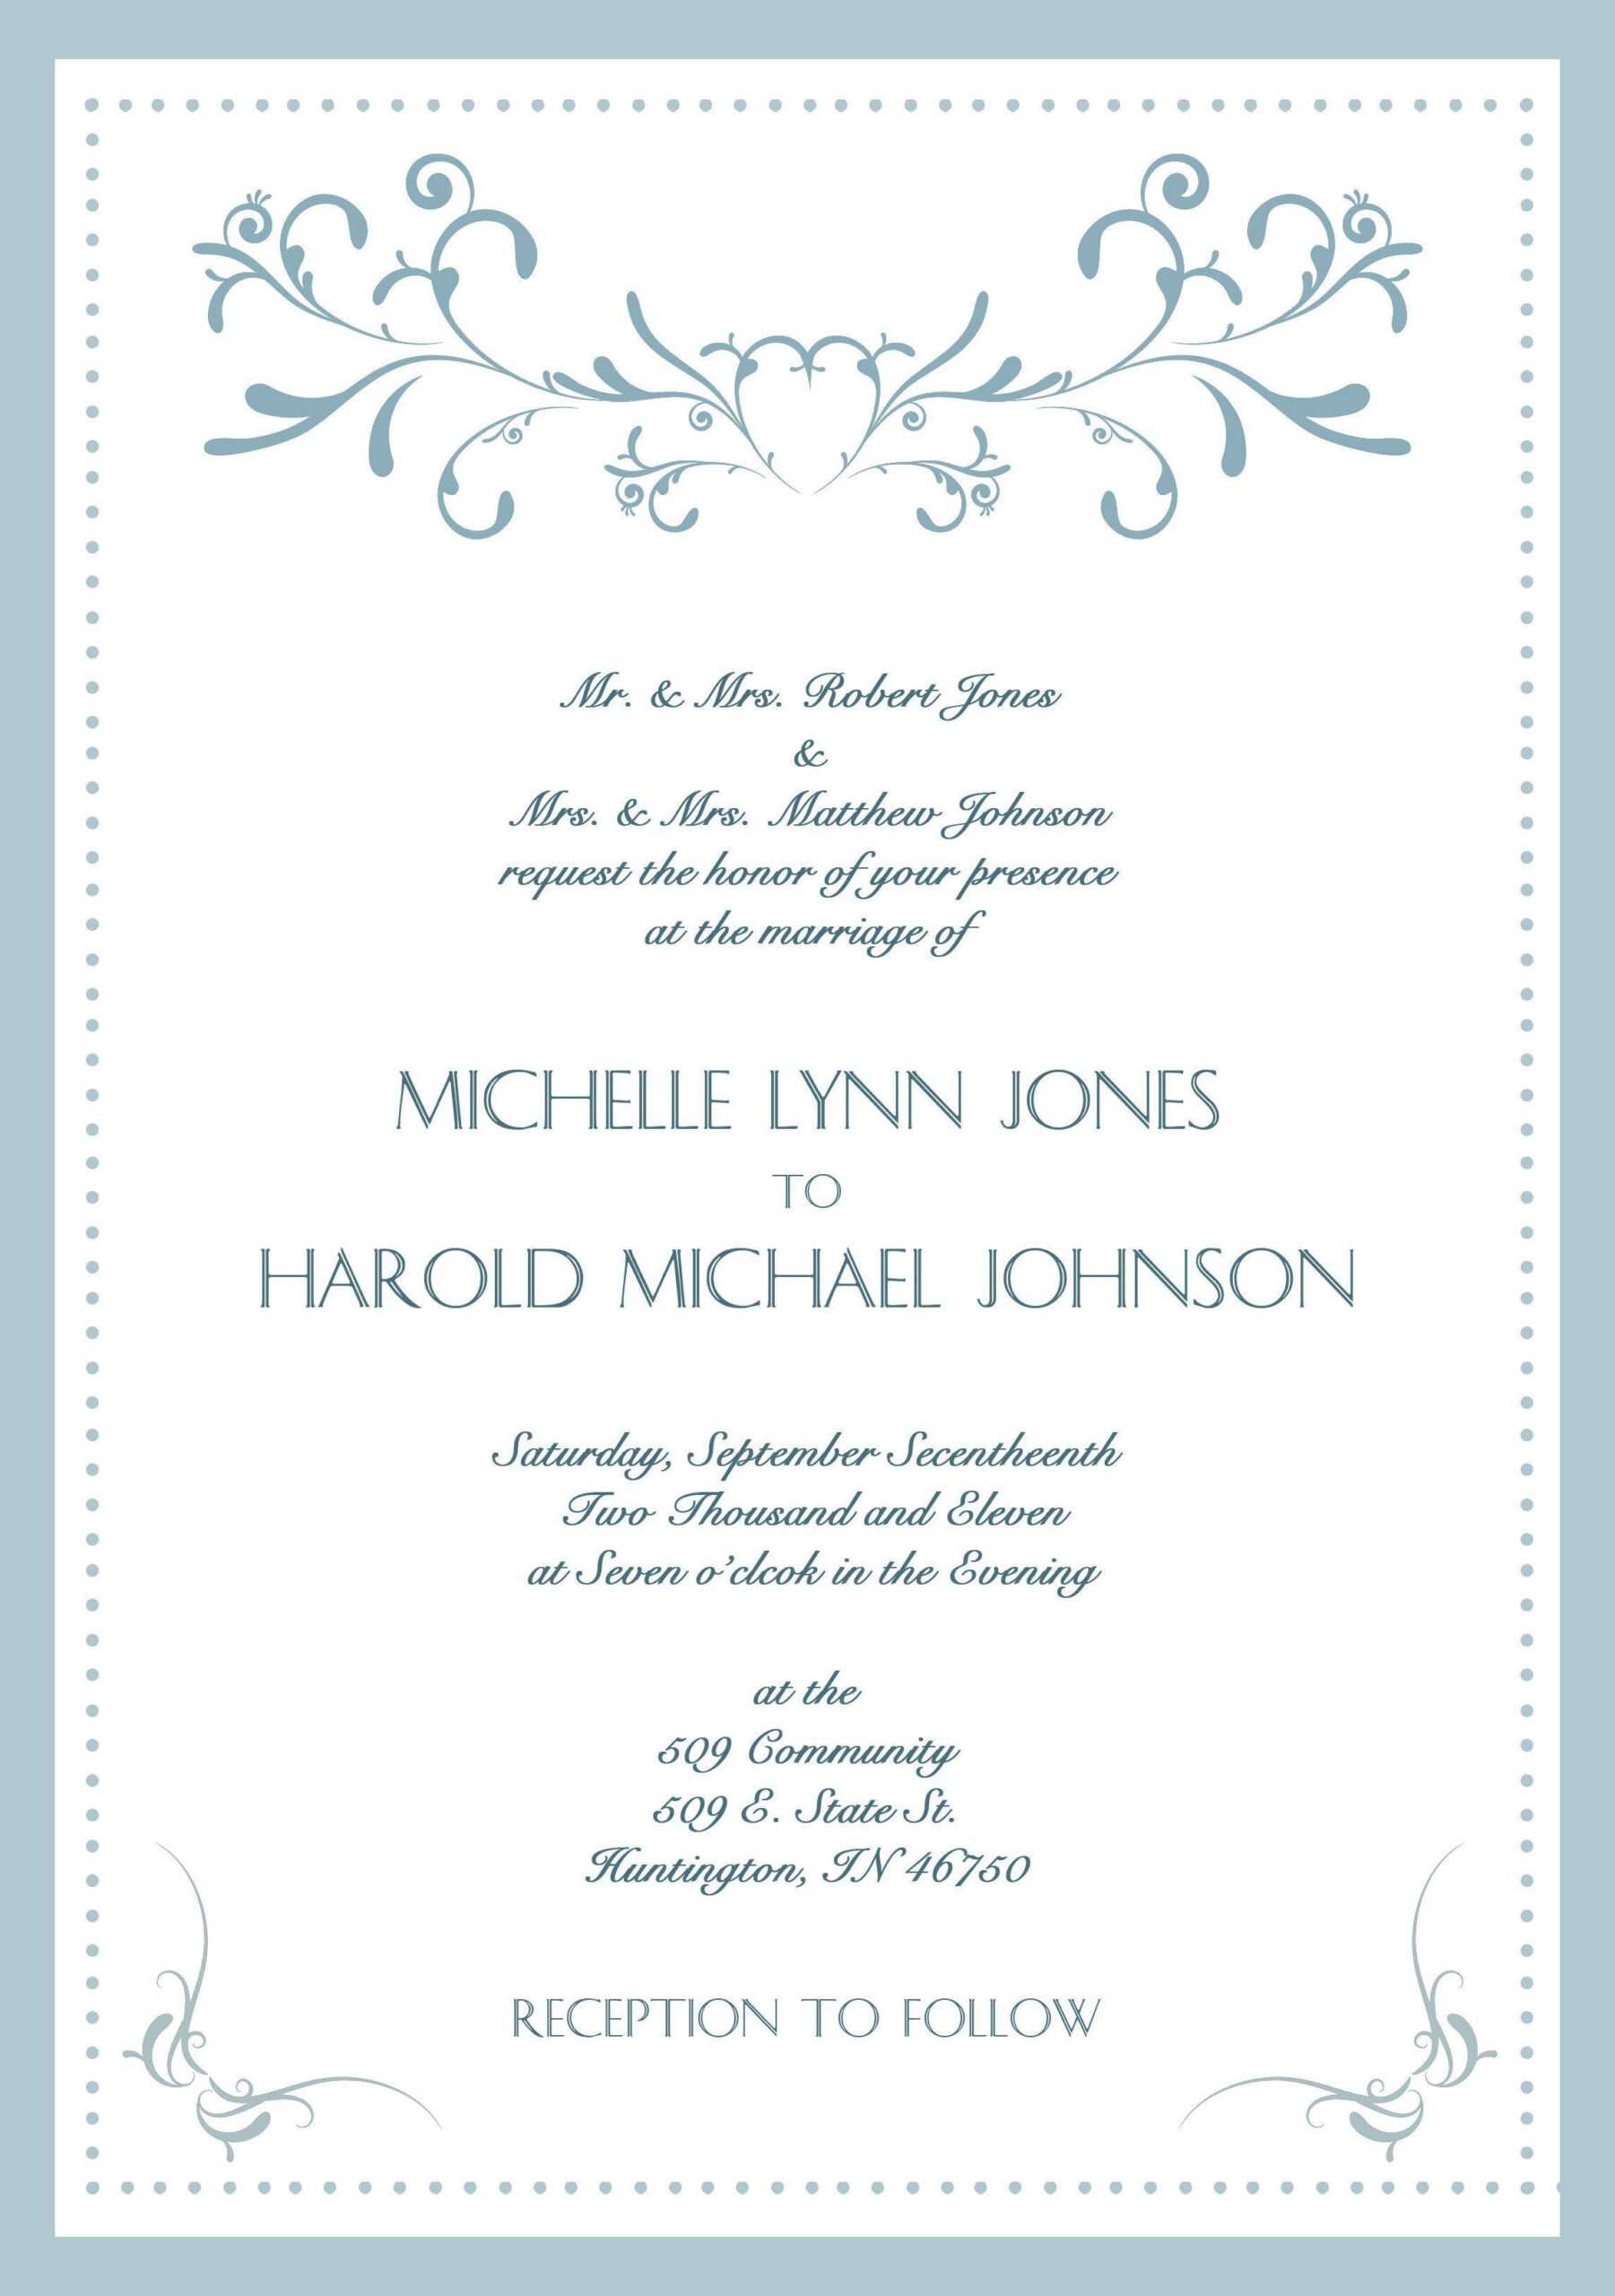 Sample Wedding Invitation Cards In English In 2019 | Wedding With Regard To Sample Wedding Invitation Cards Templates